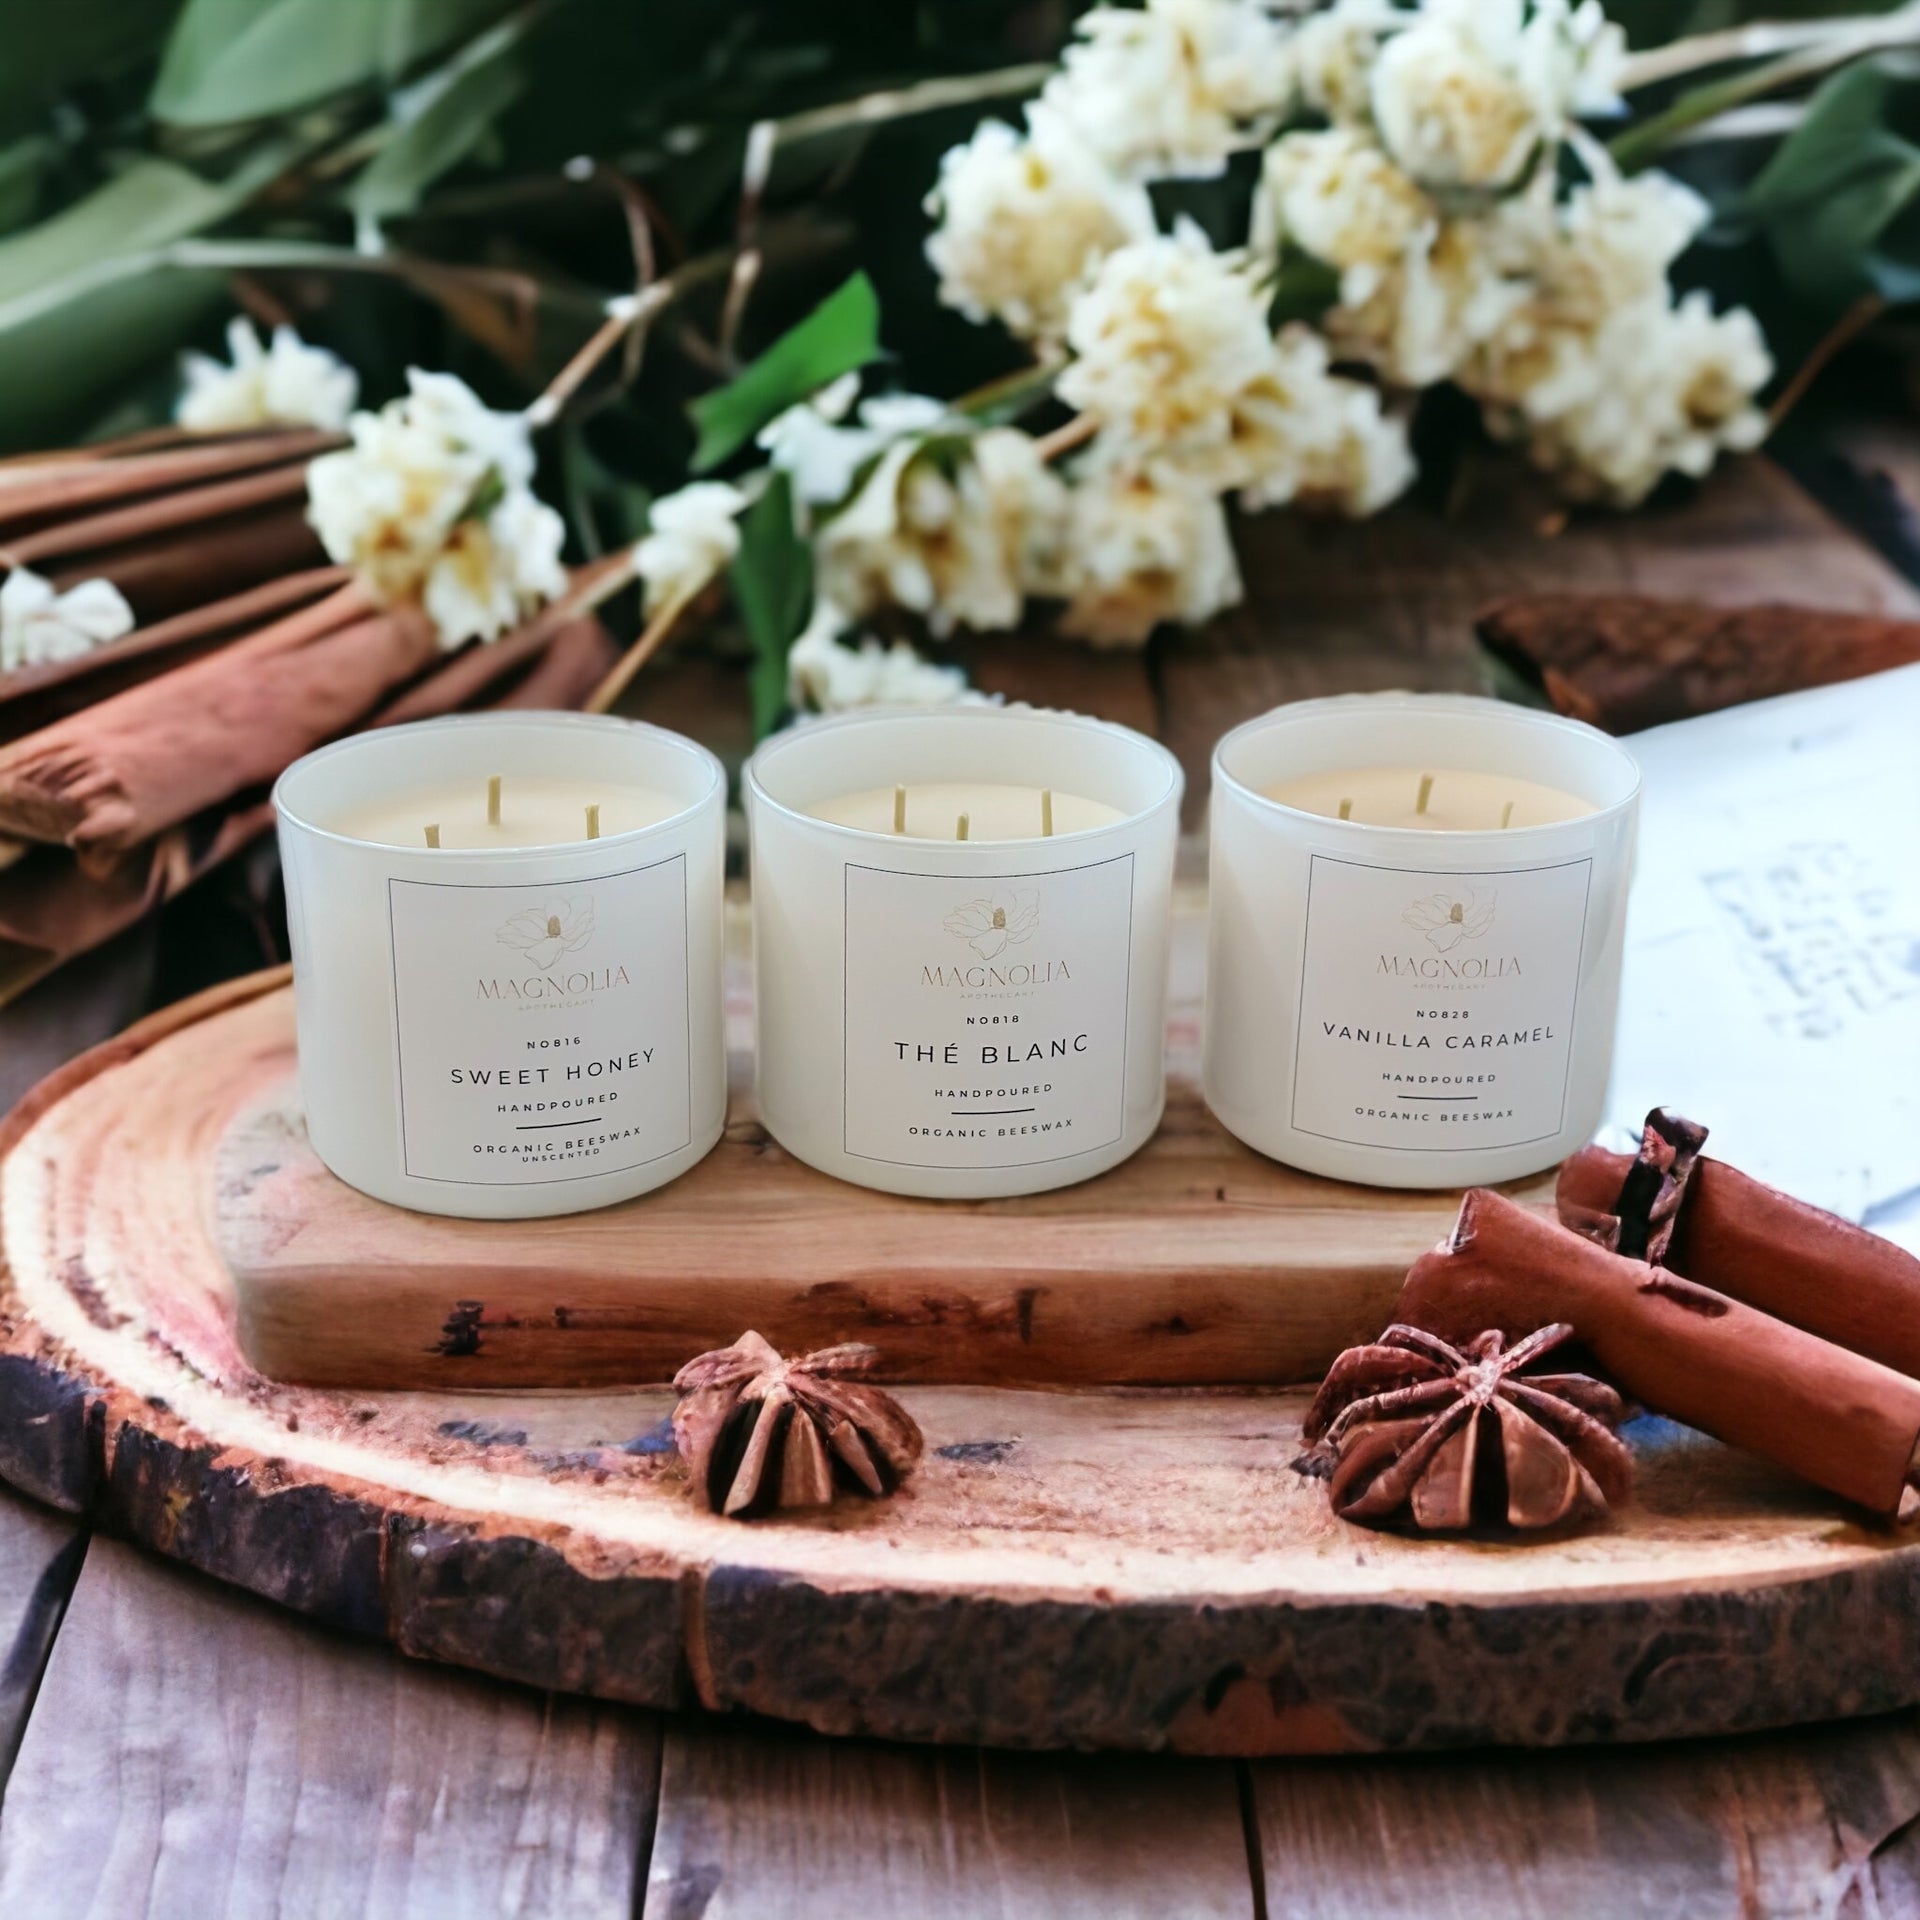 Beeswax Candles | Organic | Non-Toxic | Jar Candles | Magnolia Apothecary  Aromatherapy Candle | Purifying | Allergy-Friendly | Handpoured | Small